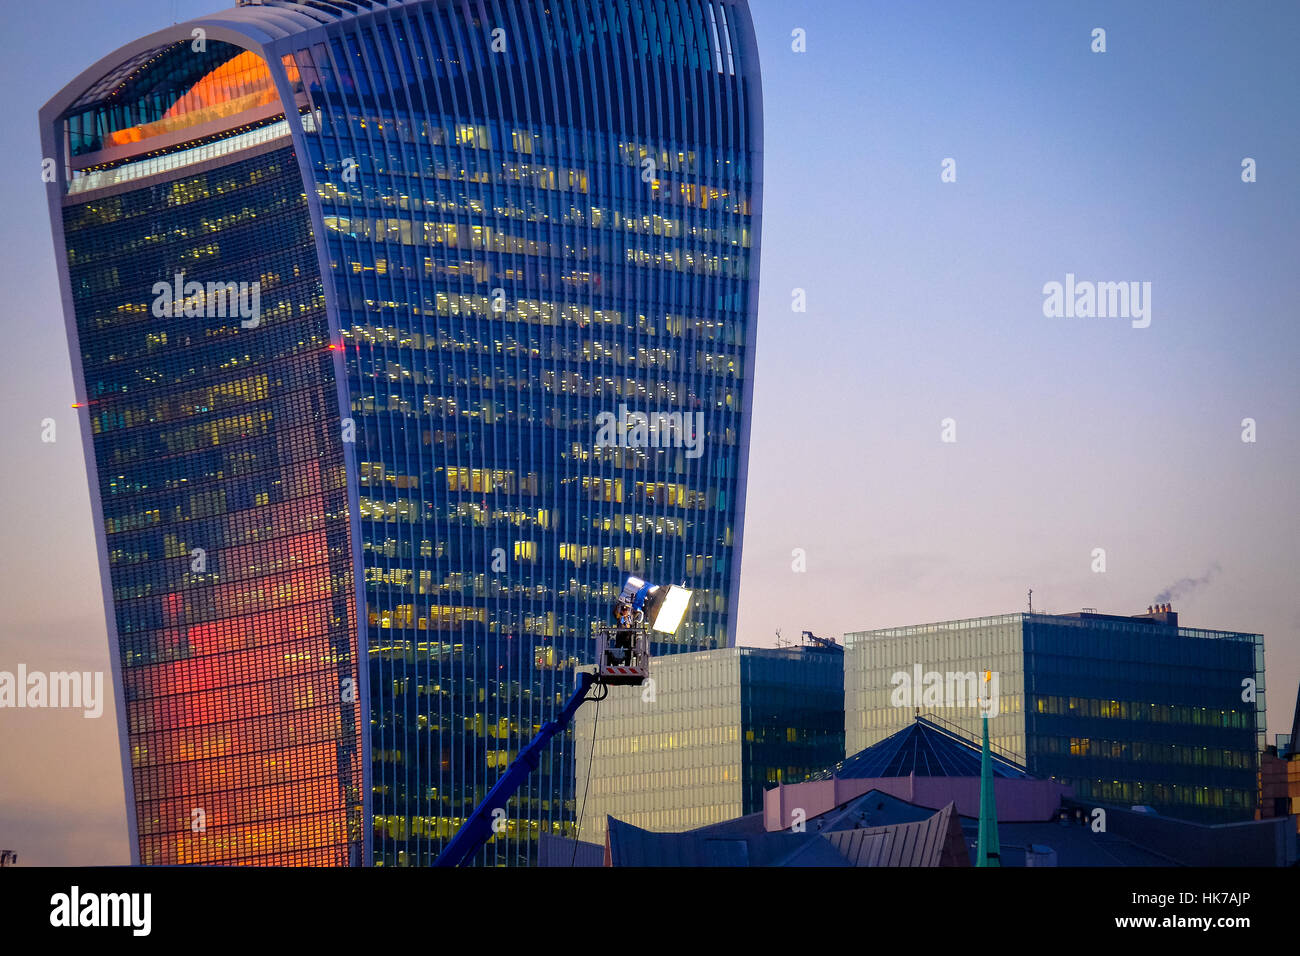 A sunset is reflected off of the windows of a futuristic looking office building whilst a lighting rig shines on a movie set. Stock Photo